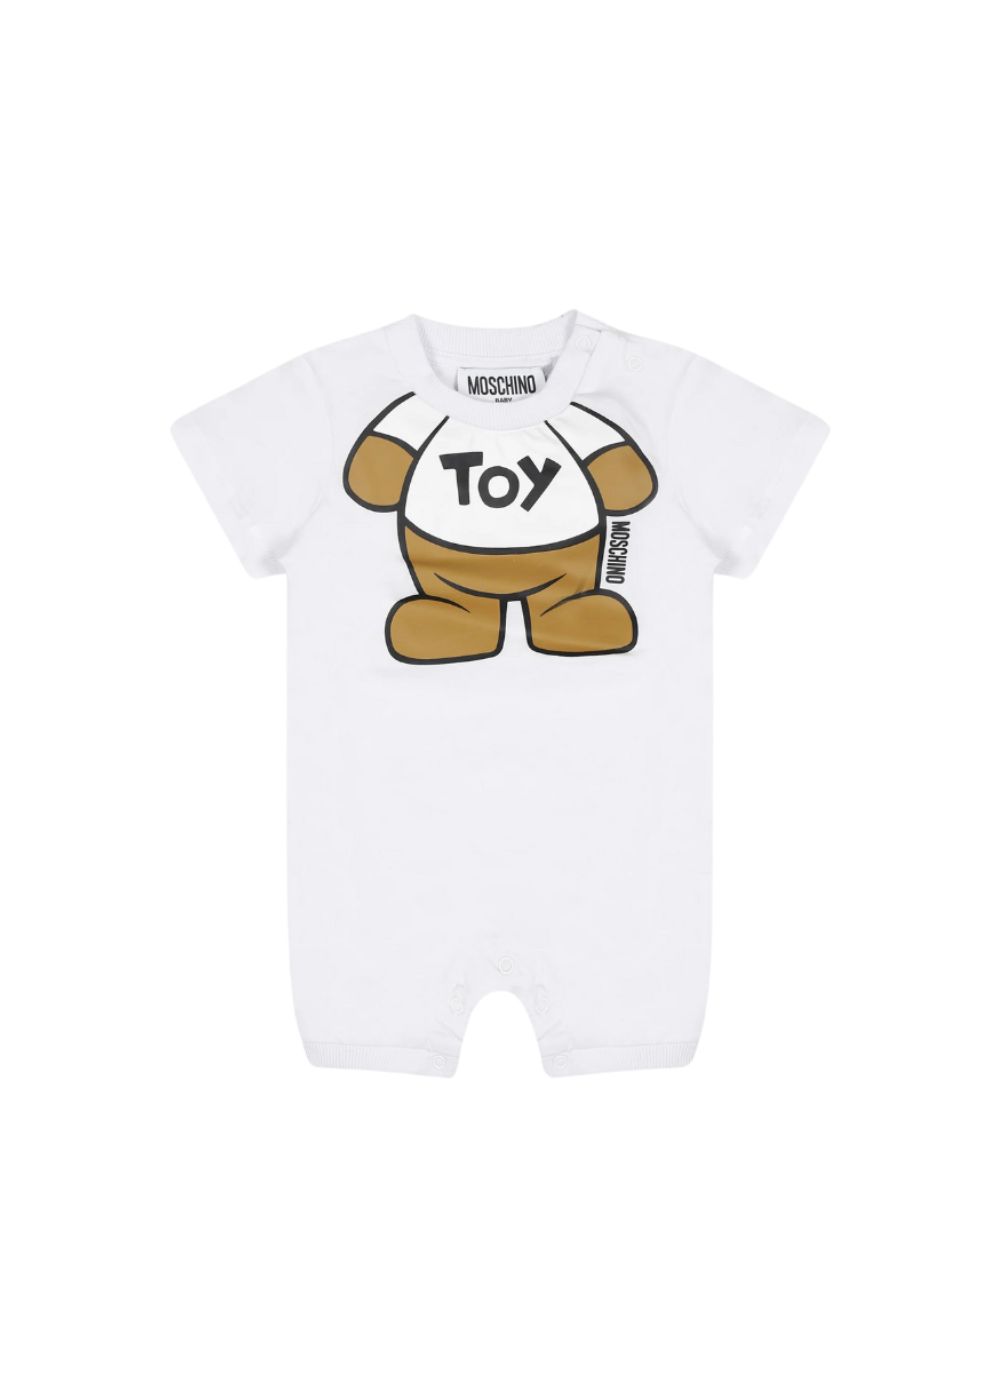 Featured image for “Moschino Pagliaccetto Teddy Bear”